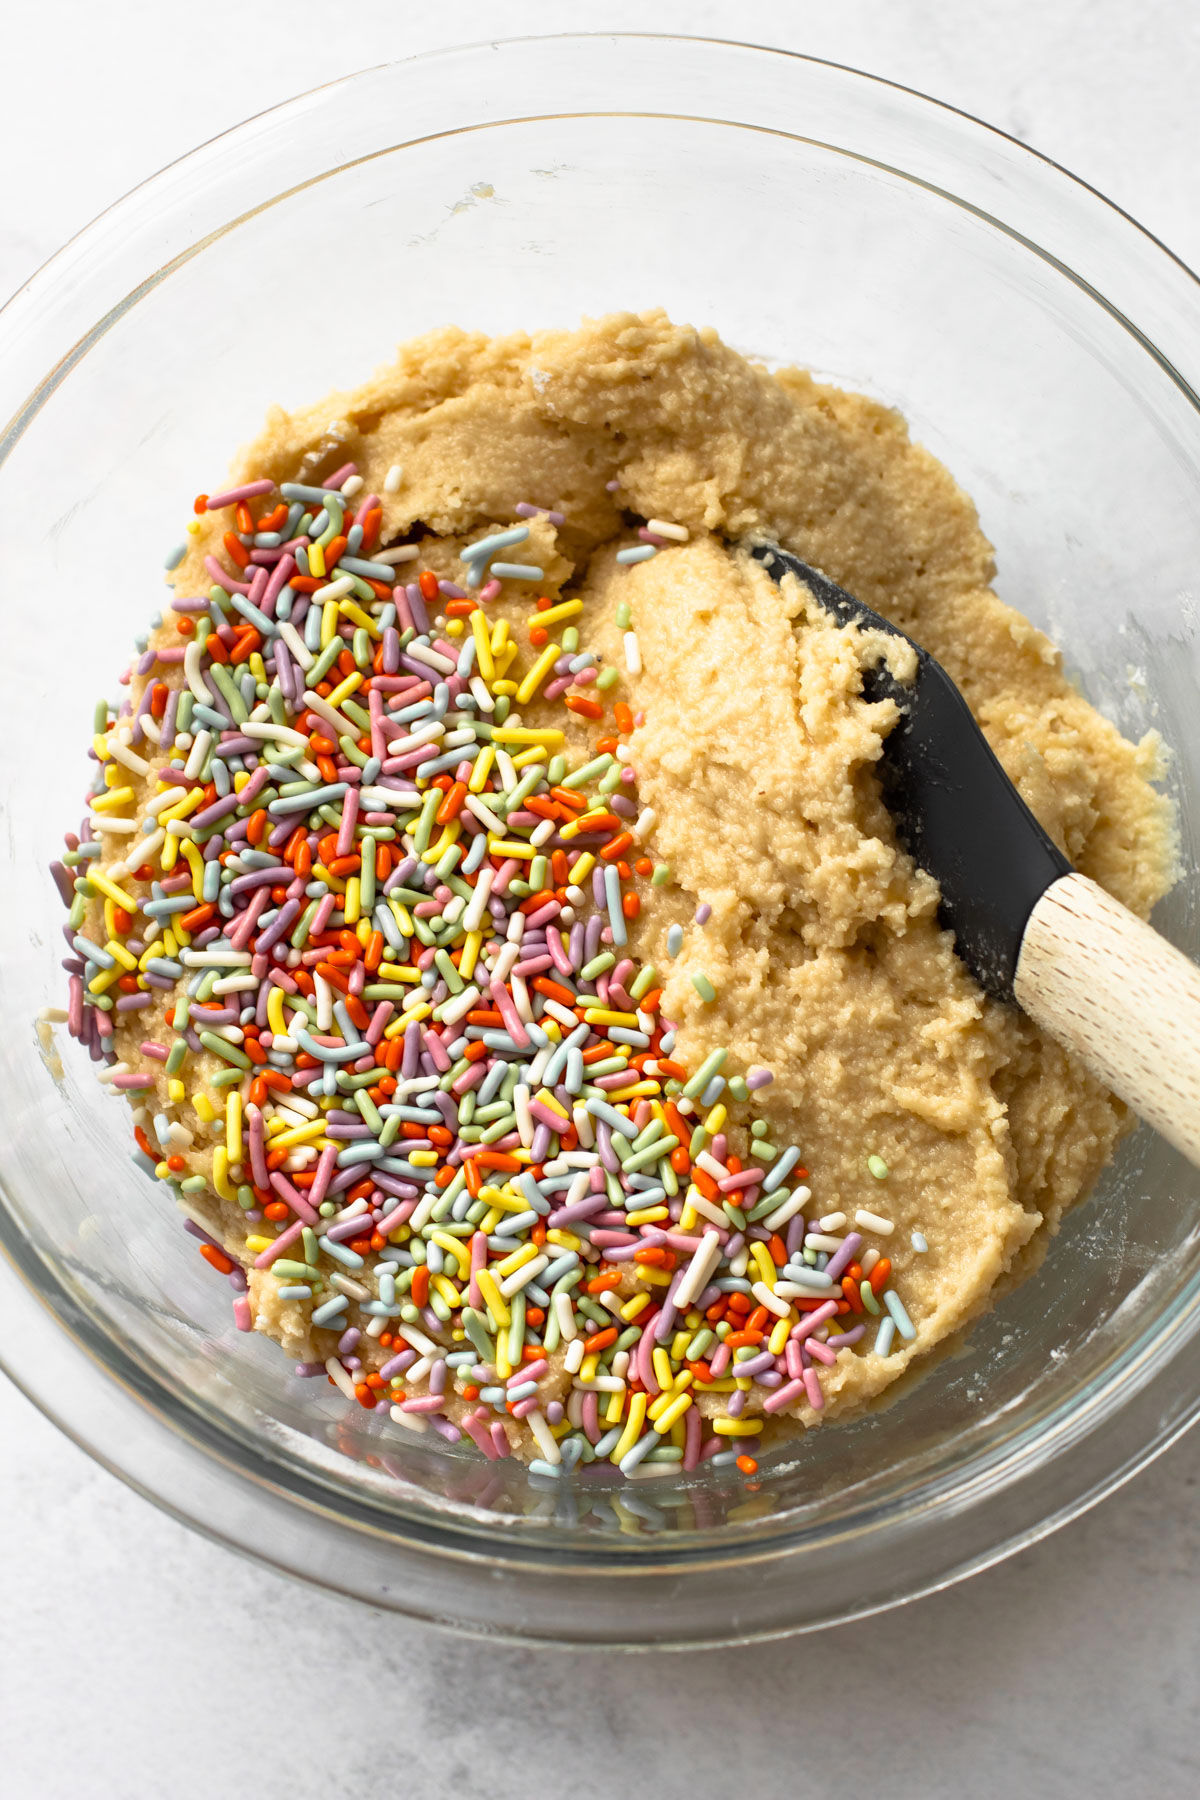 Funfetti sugar cookie batter with sprinkles.